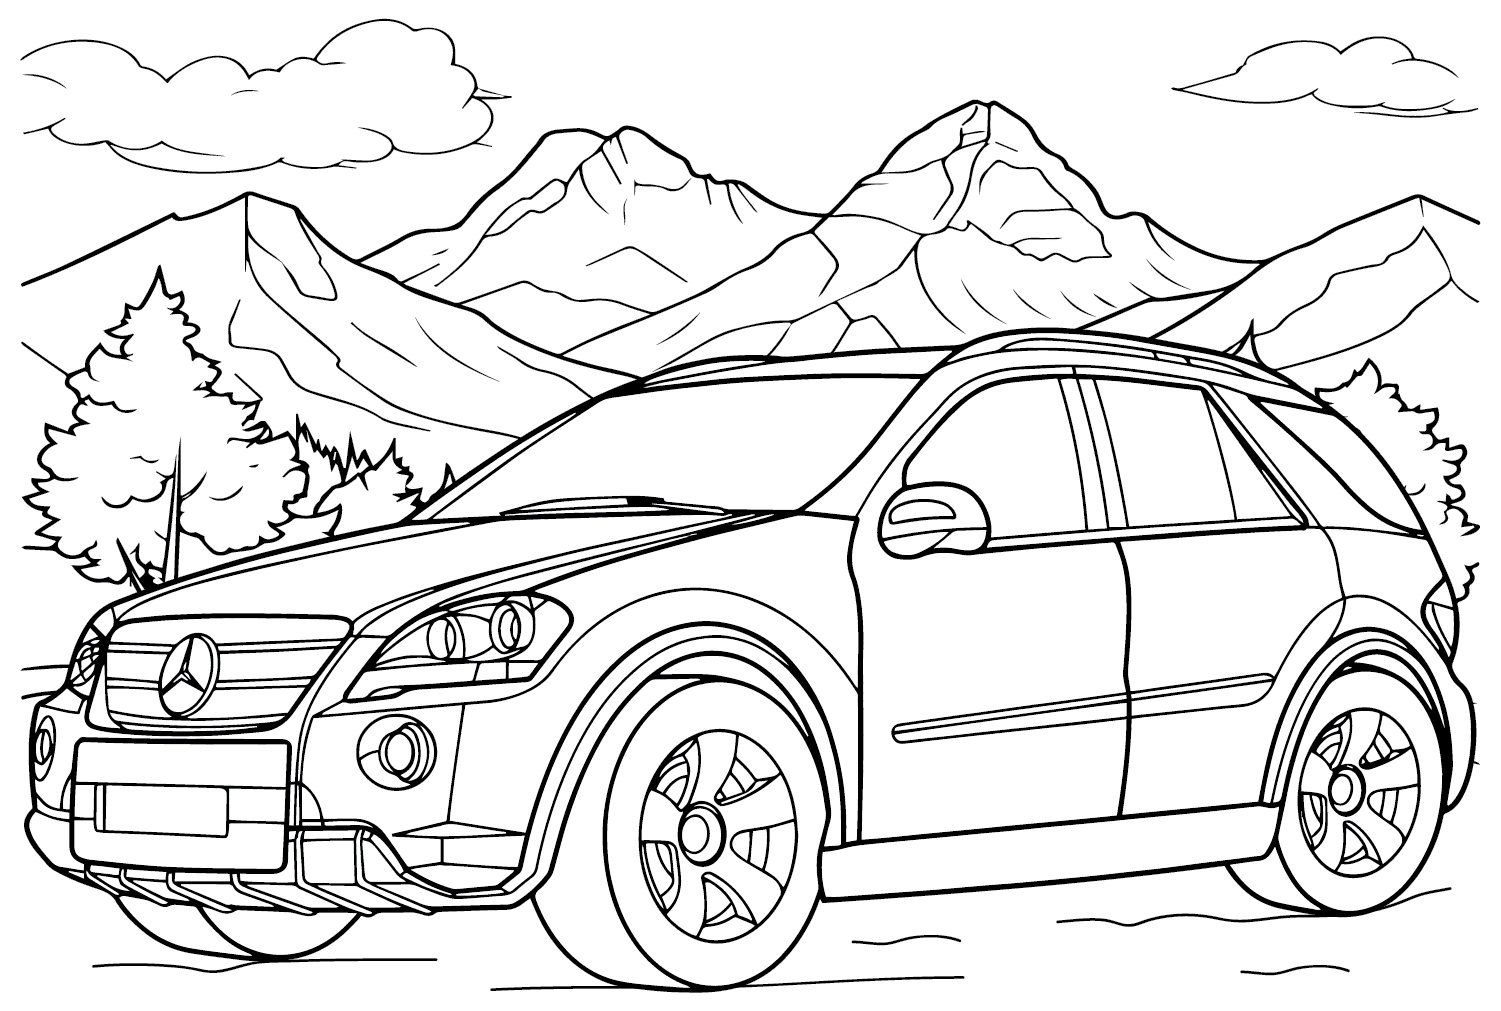 Mercedes-Benz Images to Color - Free Printable Coloring Pages